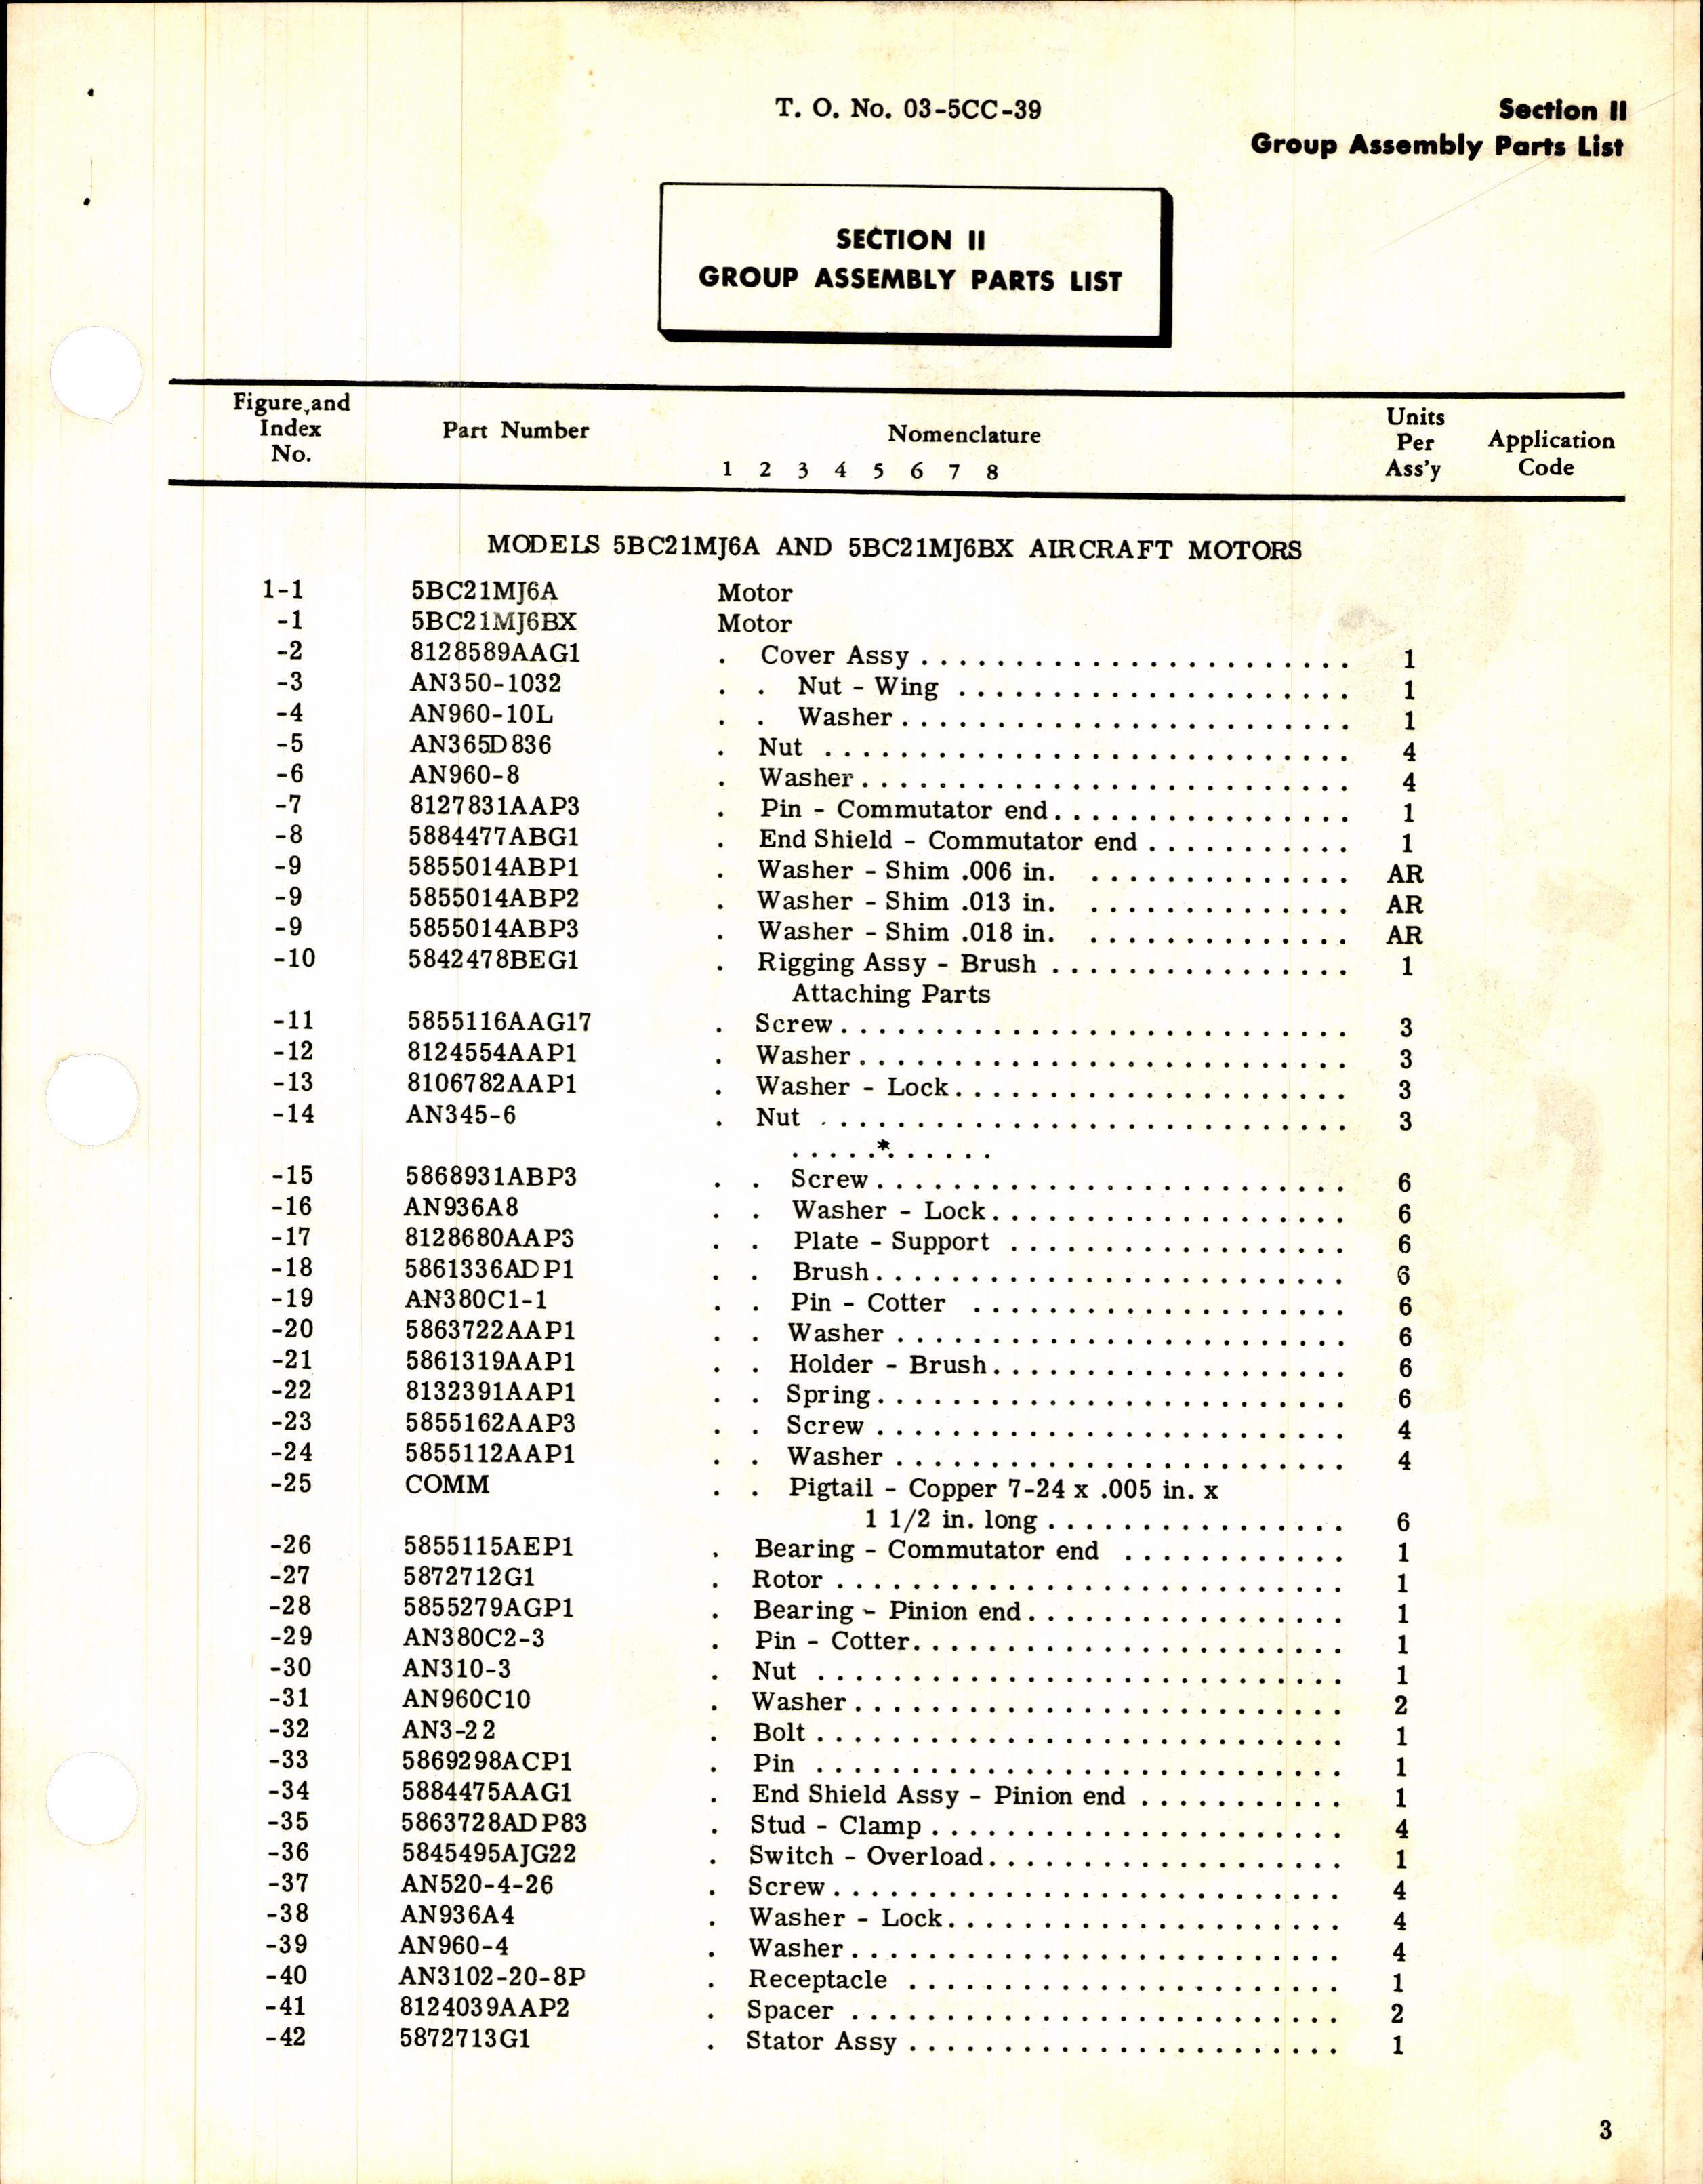 Sample page 5 from AirCorps Library document: Parts Catalog for General Electric Series 5BC21 Aircraft Motor